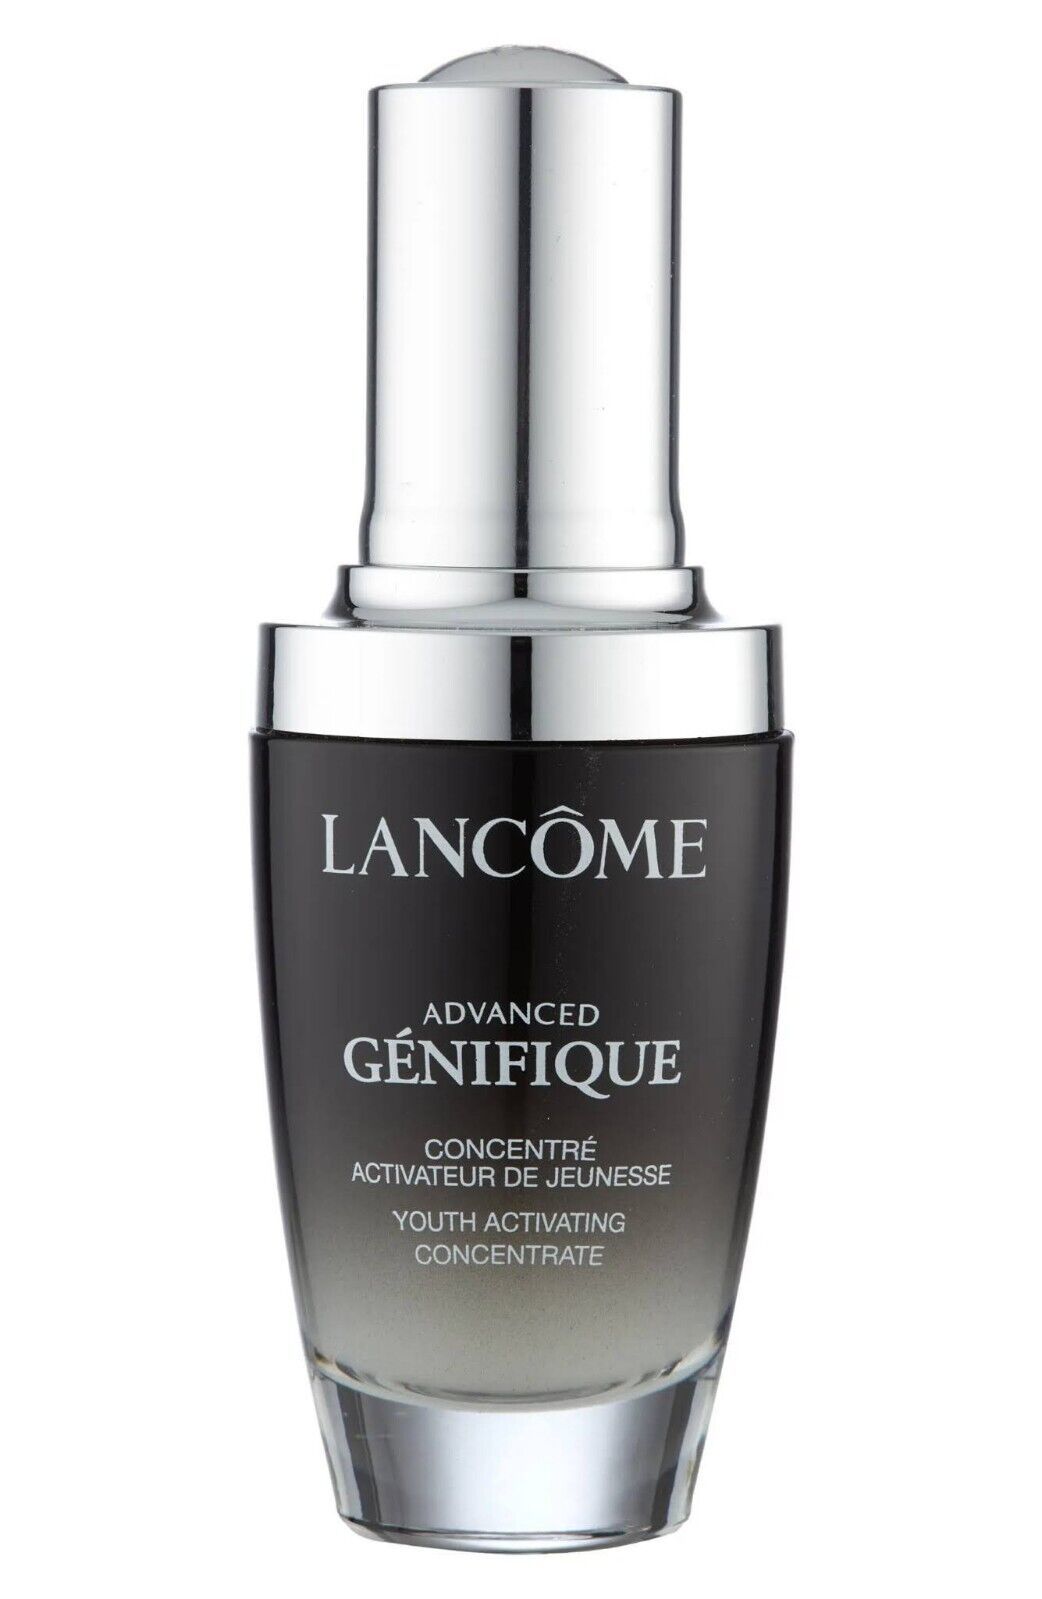 Lancome Advanced Genifique Youth Activating Concentrate 1 oz / 30ml